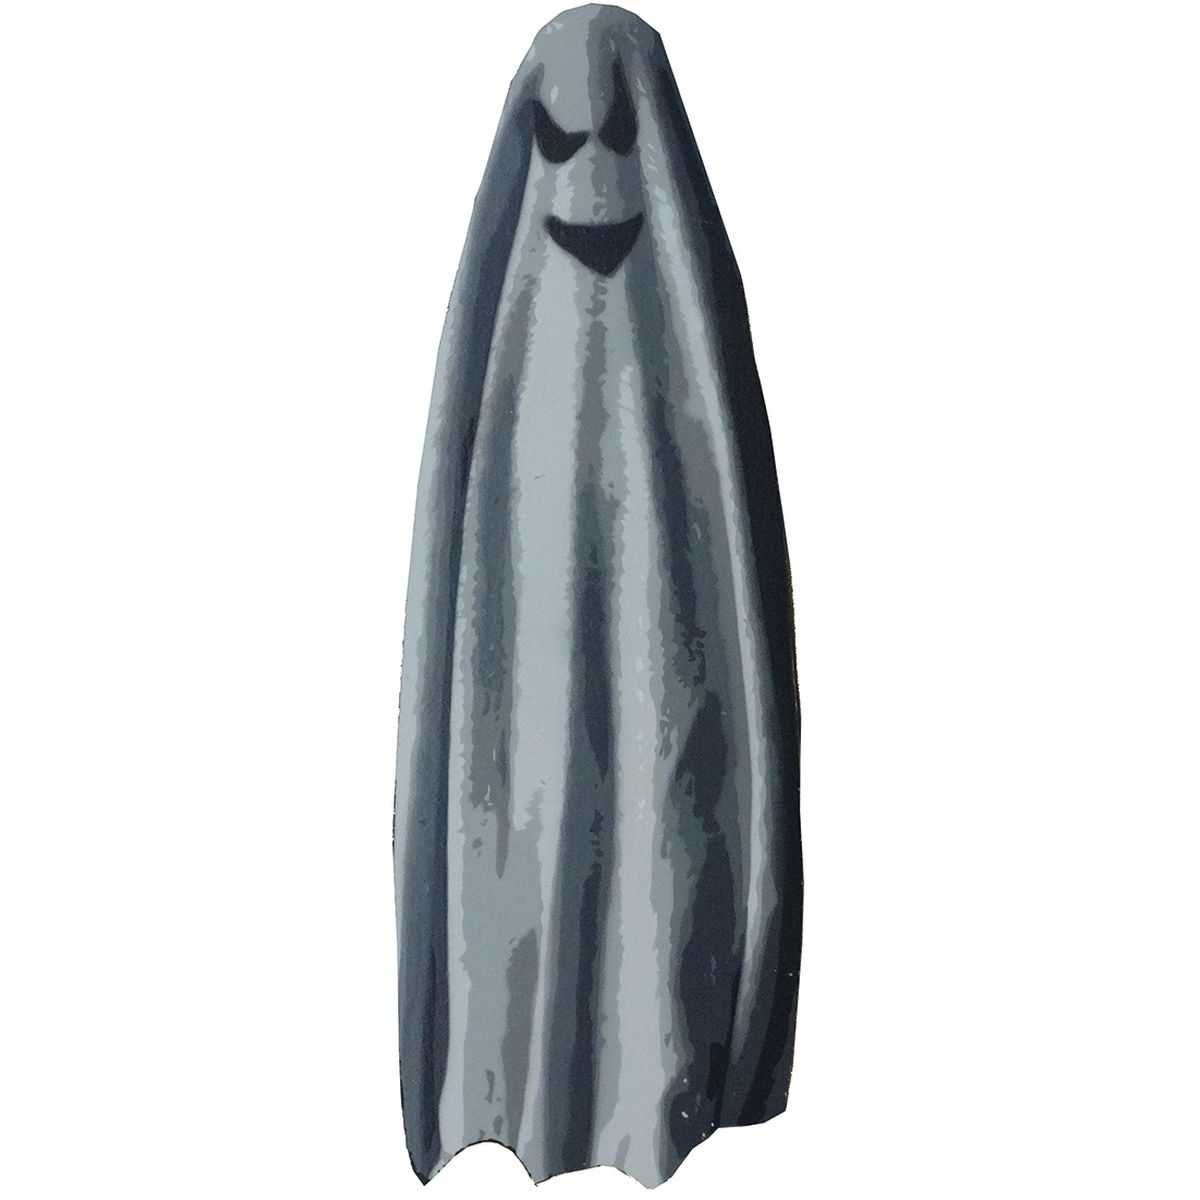 HUMASK GHOST SMILEY